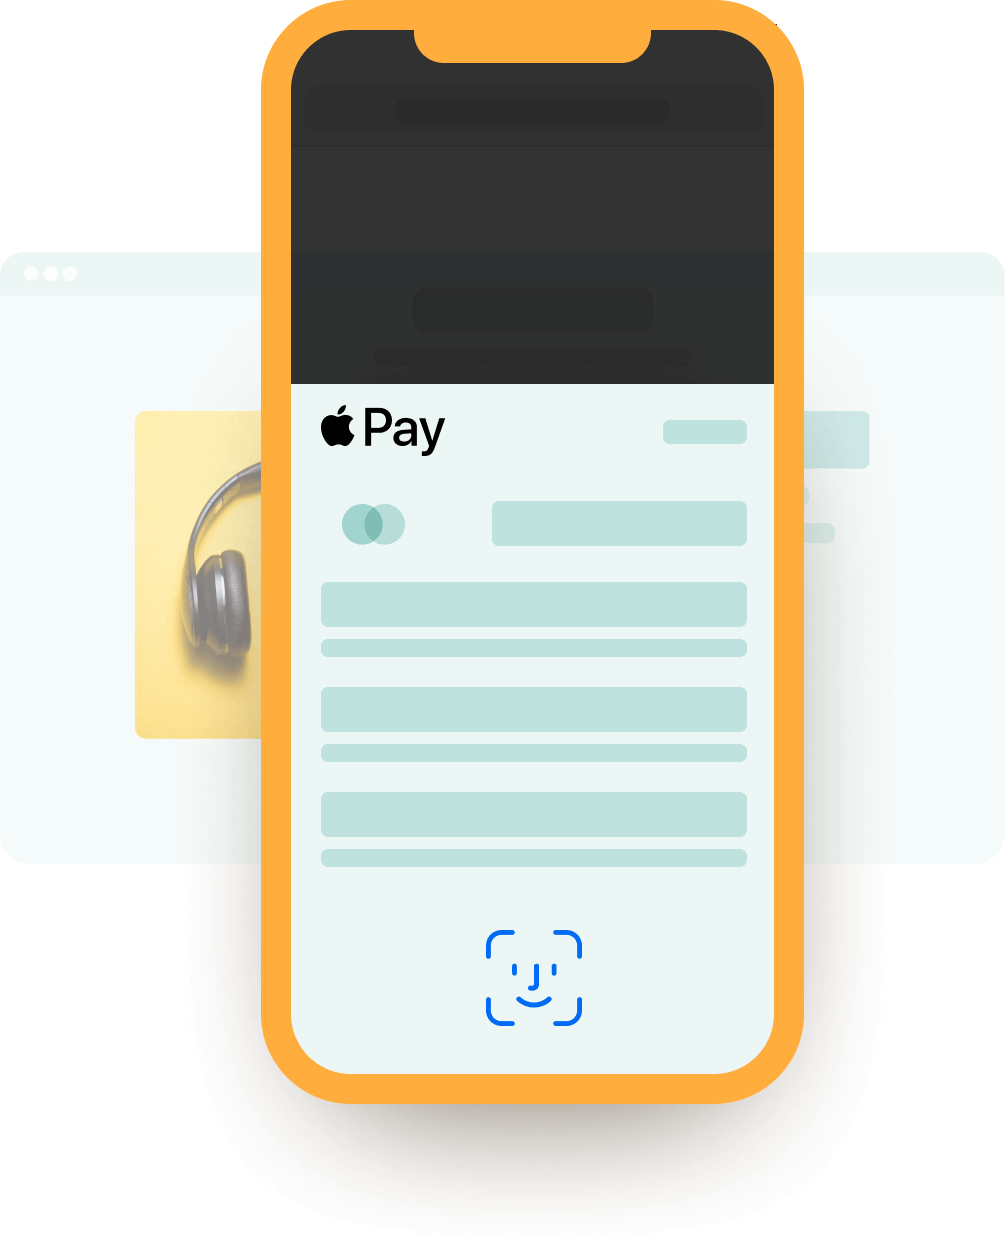 Pay with Apple Pay on mobile